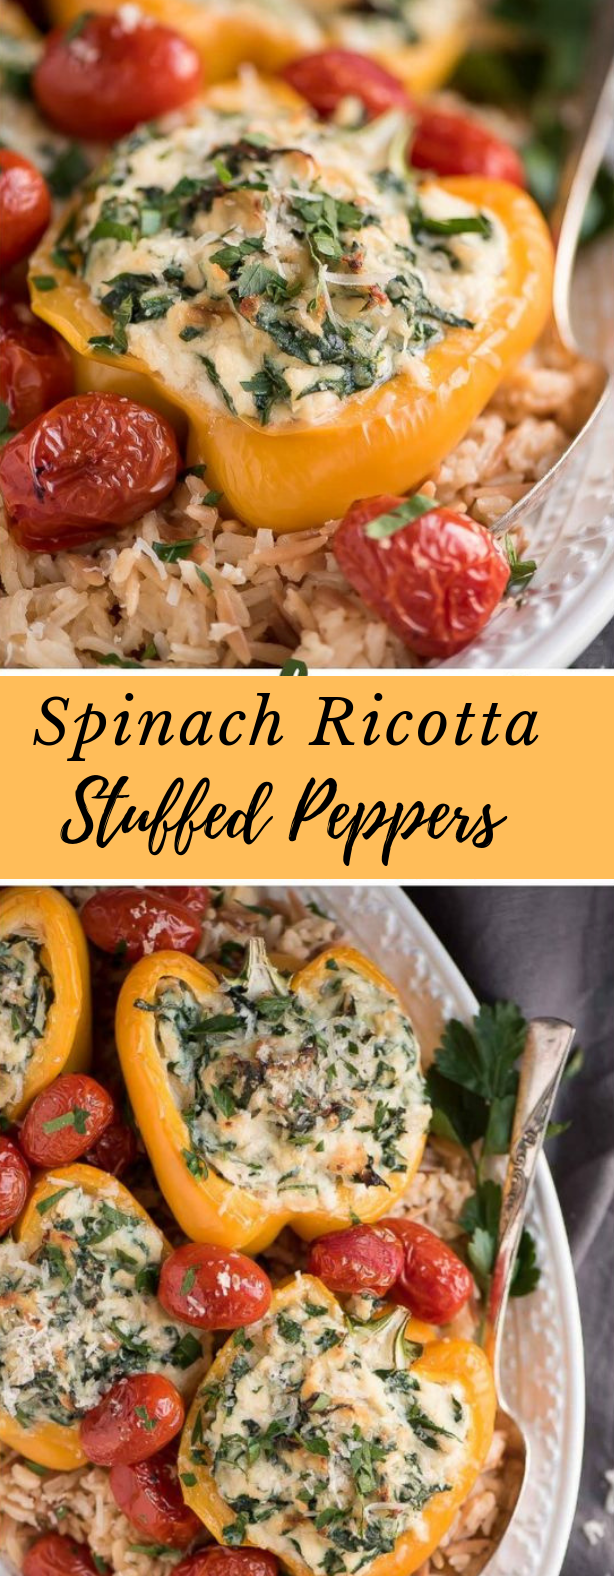 SPINACH RICOTTA STUFFED PEPPERS #vegetarian #delicious